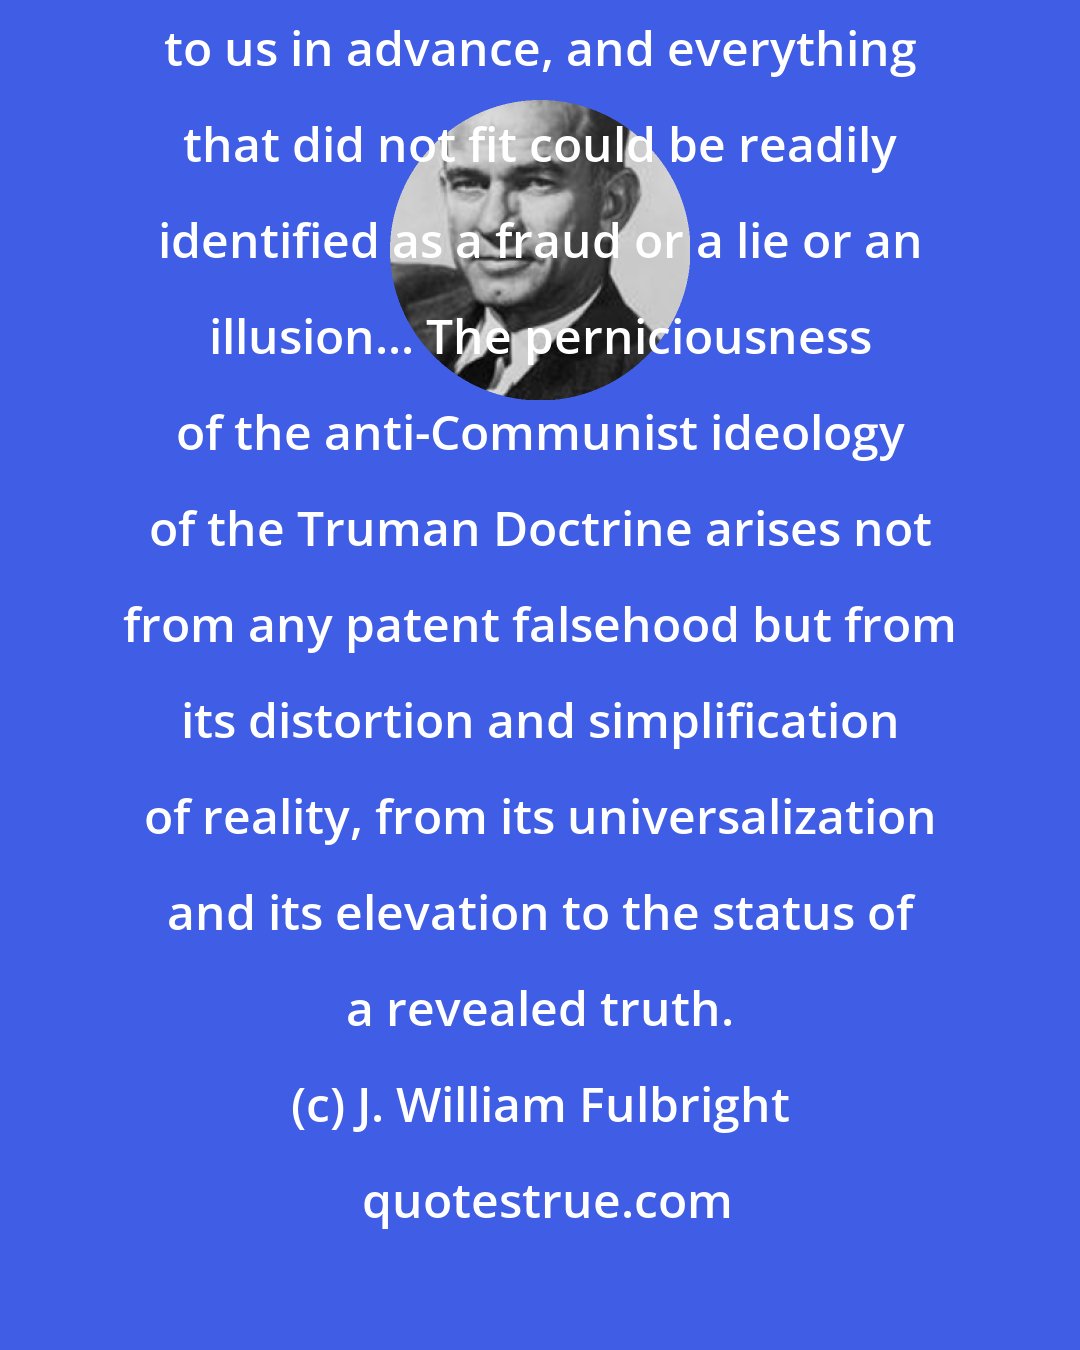 J. William Fulbright: Like medieval theologians we had a philosophy that explained everything to us in advance, and everything that did not fit could be readily identified as a fraud or a lie or an illusion... The perniciousness of the anti-Communist ideology of the Truman Doctrine arises not from any patent falsehood but from its distortion and simplification of reality, from its universalization and its elevation to the status of a revealed truth.